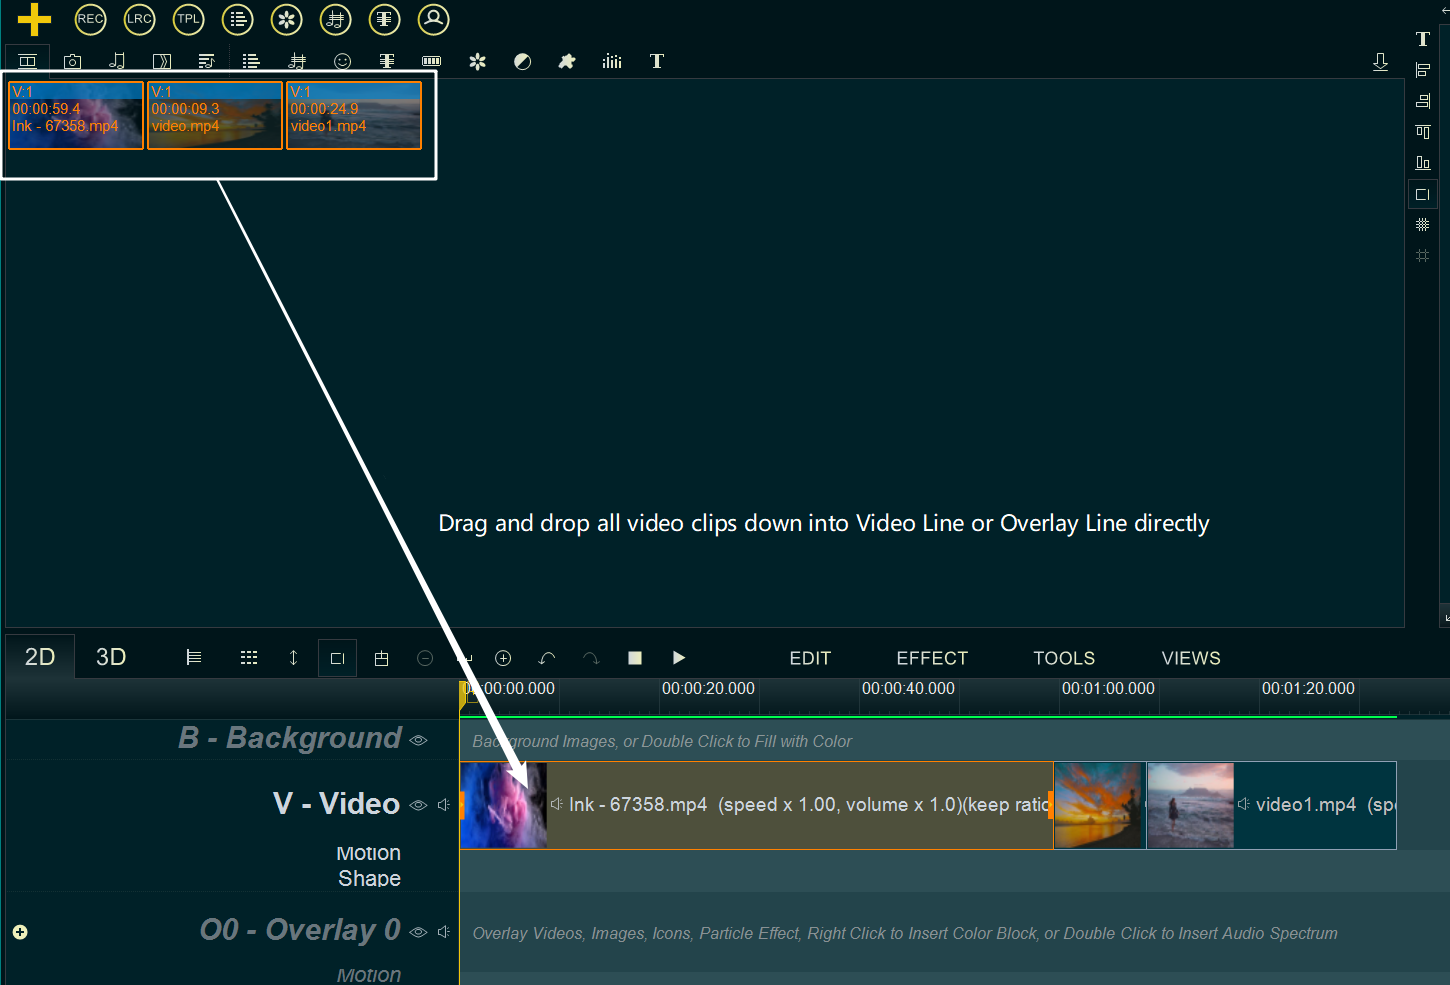 drag and drop all videos into Video Line or Overlay Line